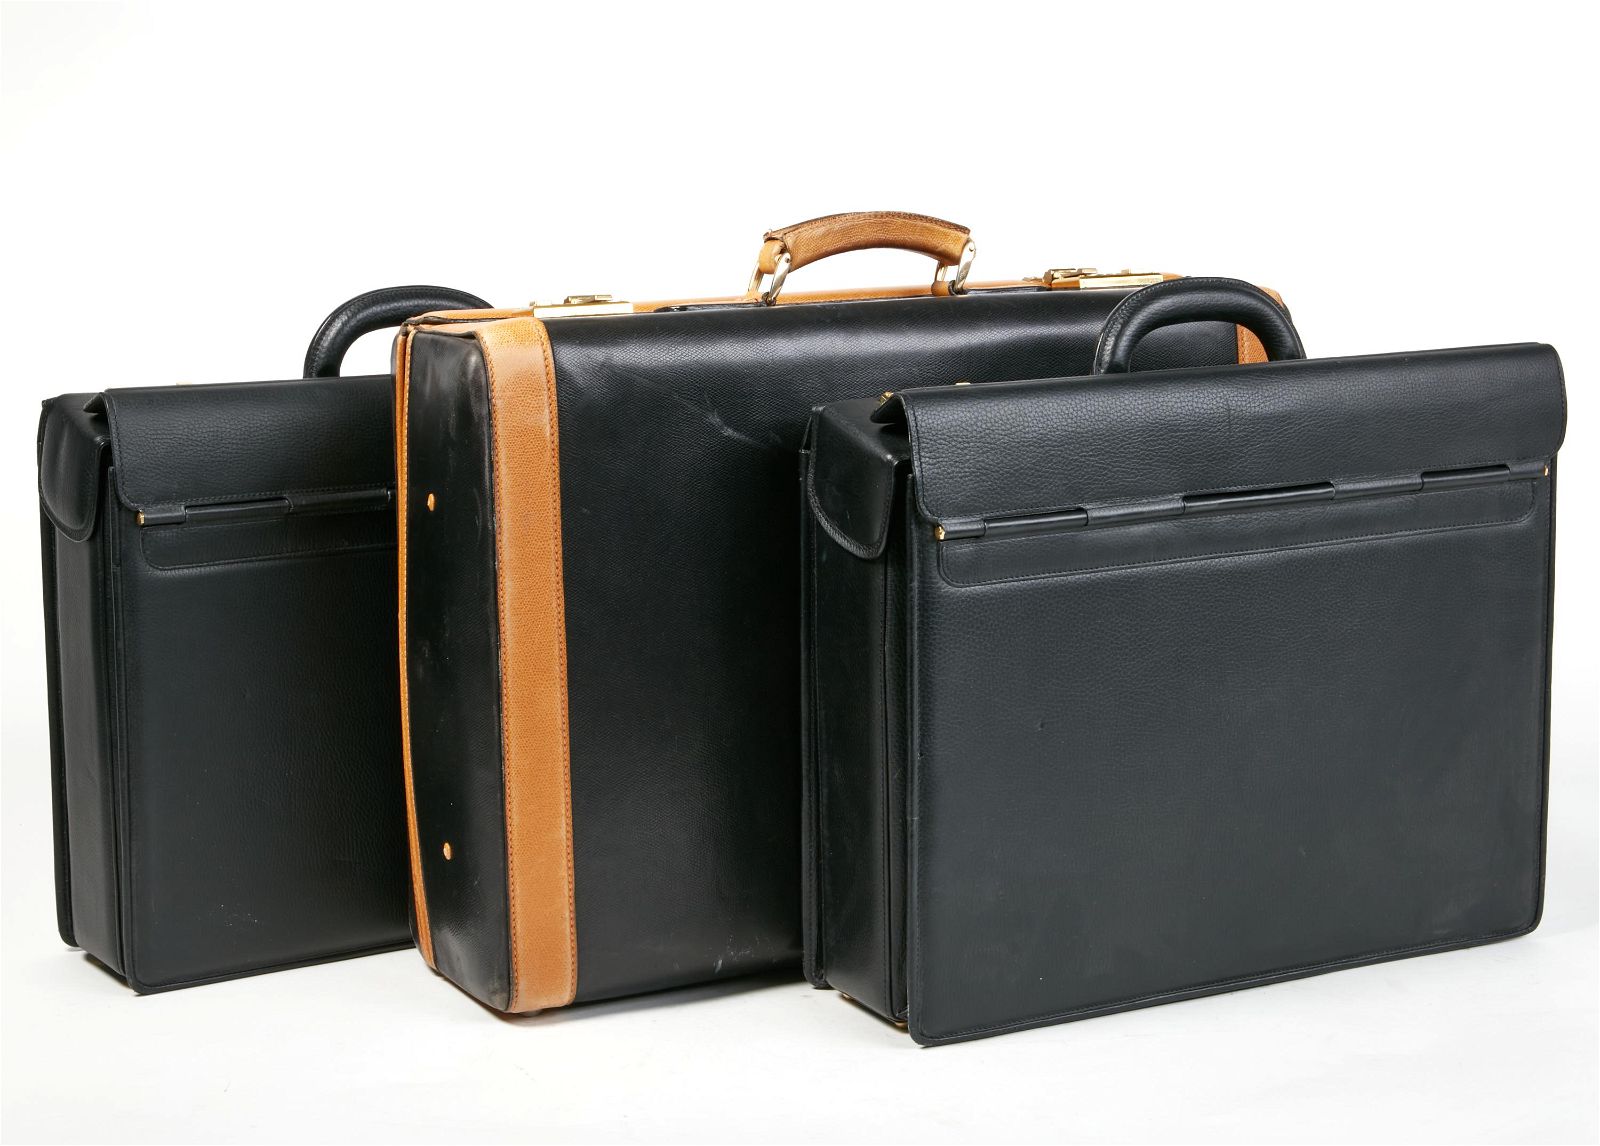 THREE LEATHER SUITCASESThree leather